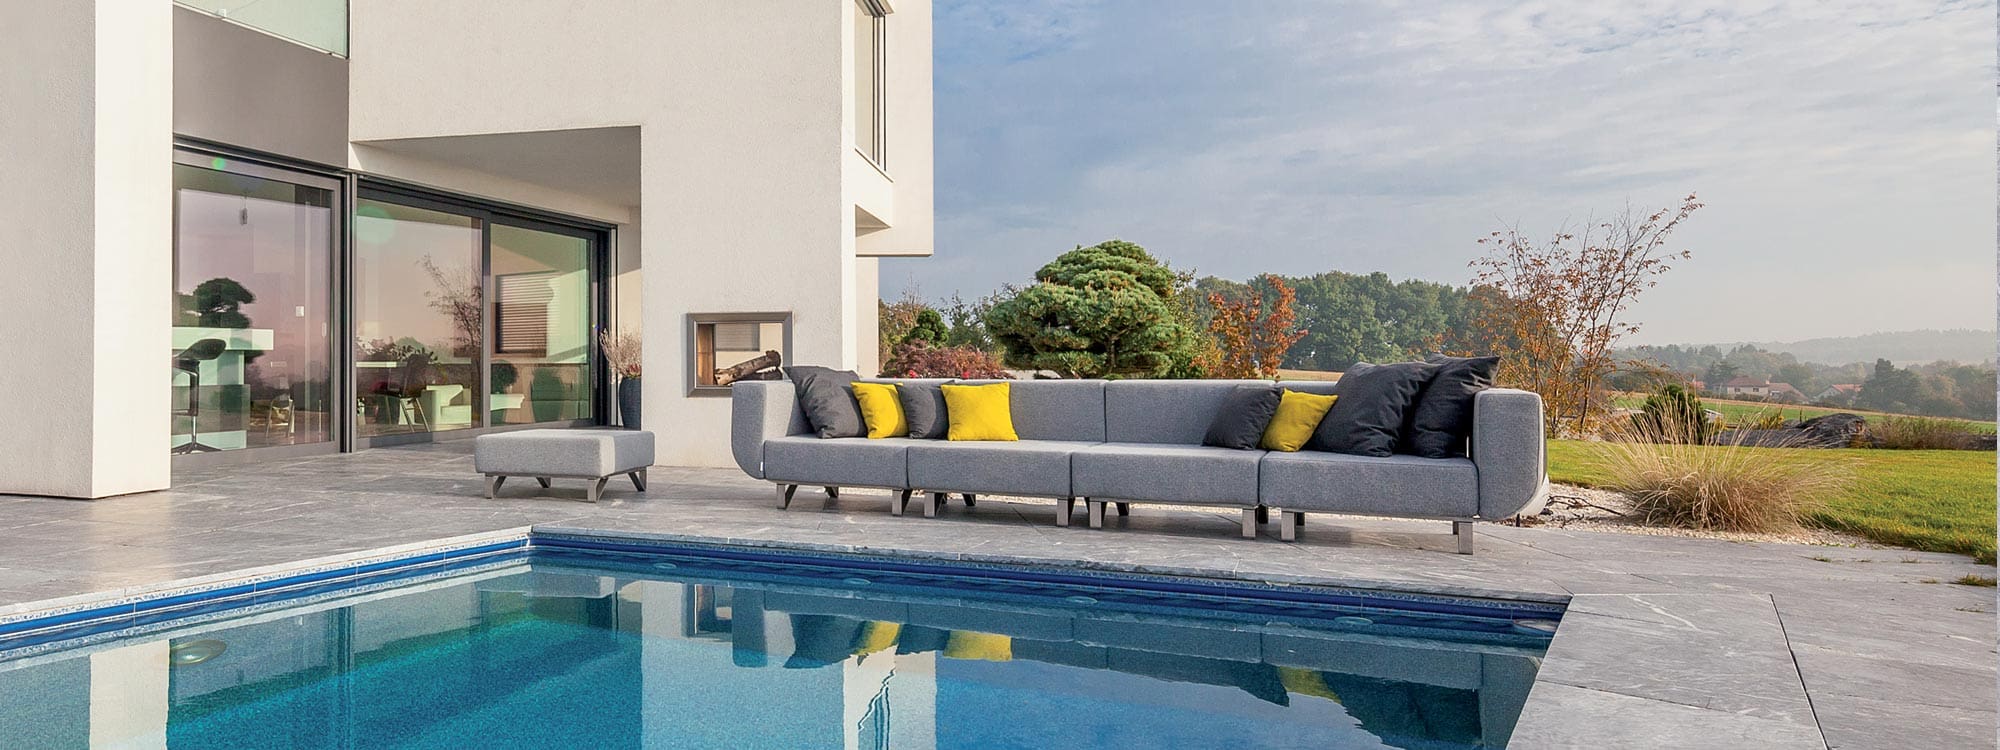 Image of Lotos large outdoor sofa on poolside with reflection of the furniture shown in water